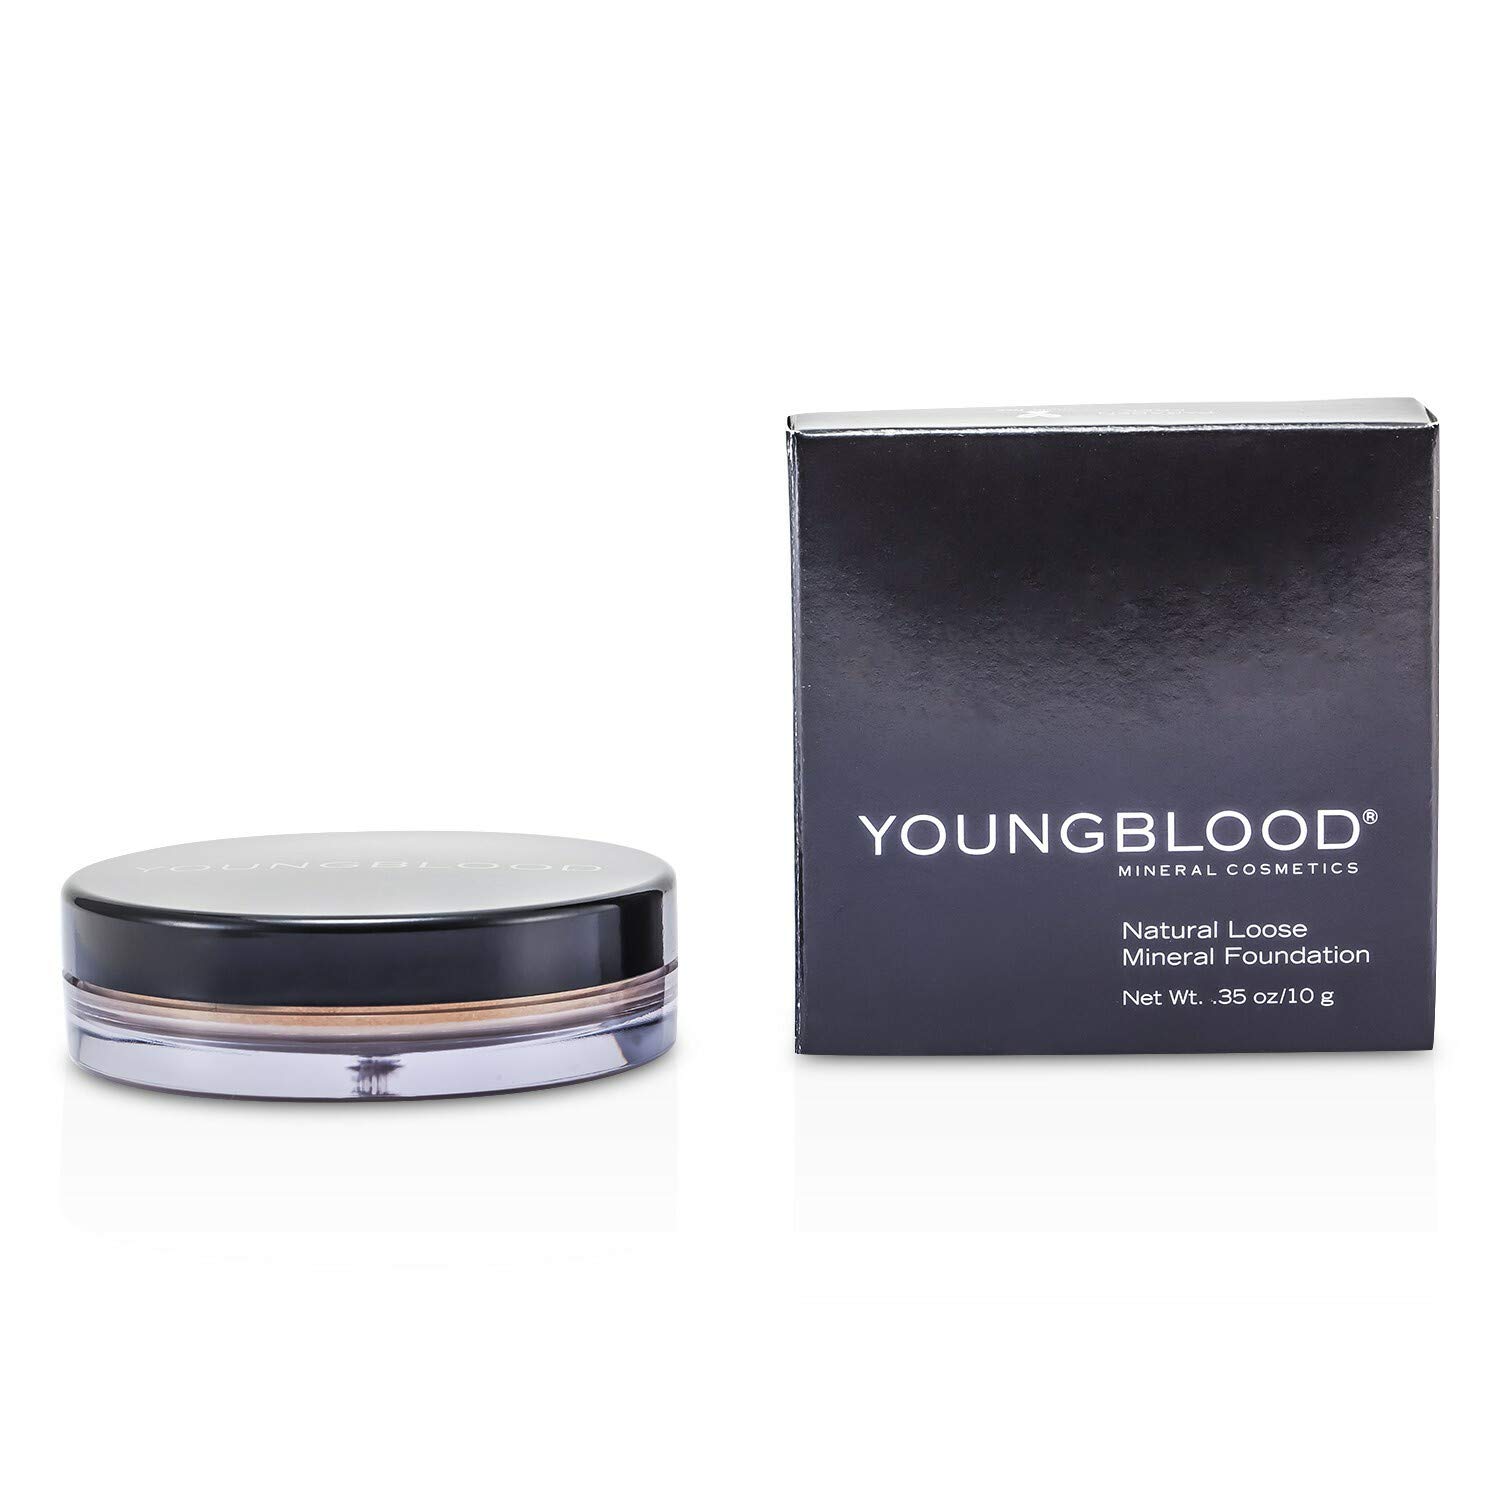 Youngblood Clean Luxury Cosmetics Natural Loose Mineral Foundation, Tawnee | Loose Face Powder Foundation Mineral Illuminating Full Coverage Oil Control Matte Lasting | Vegan, Cruelty-Free